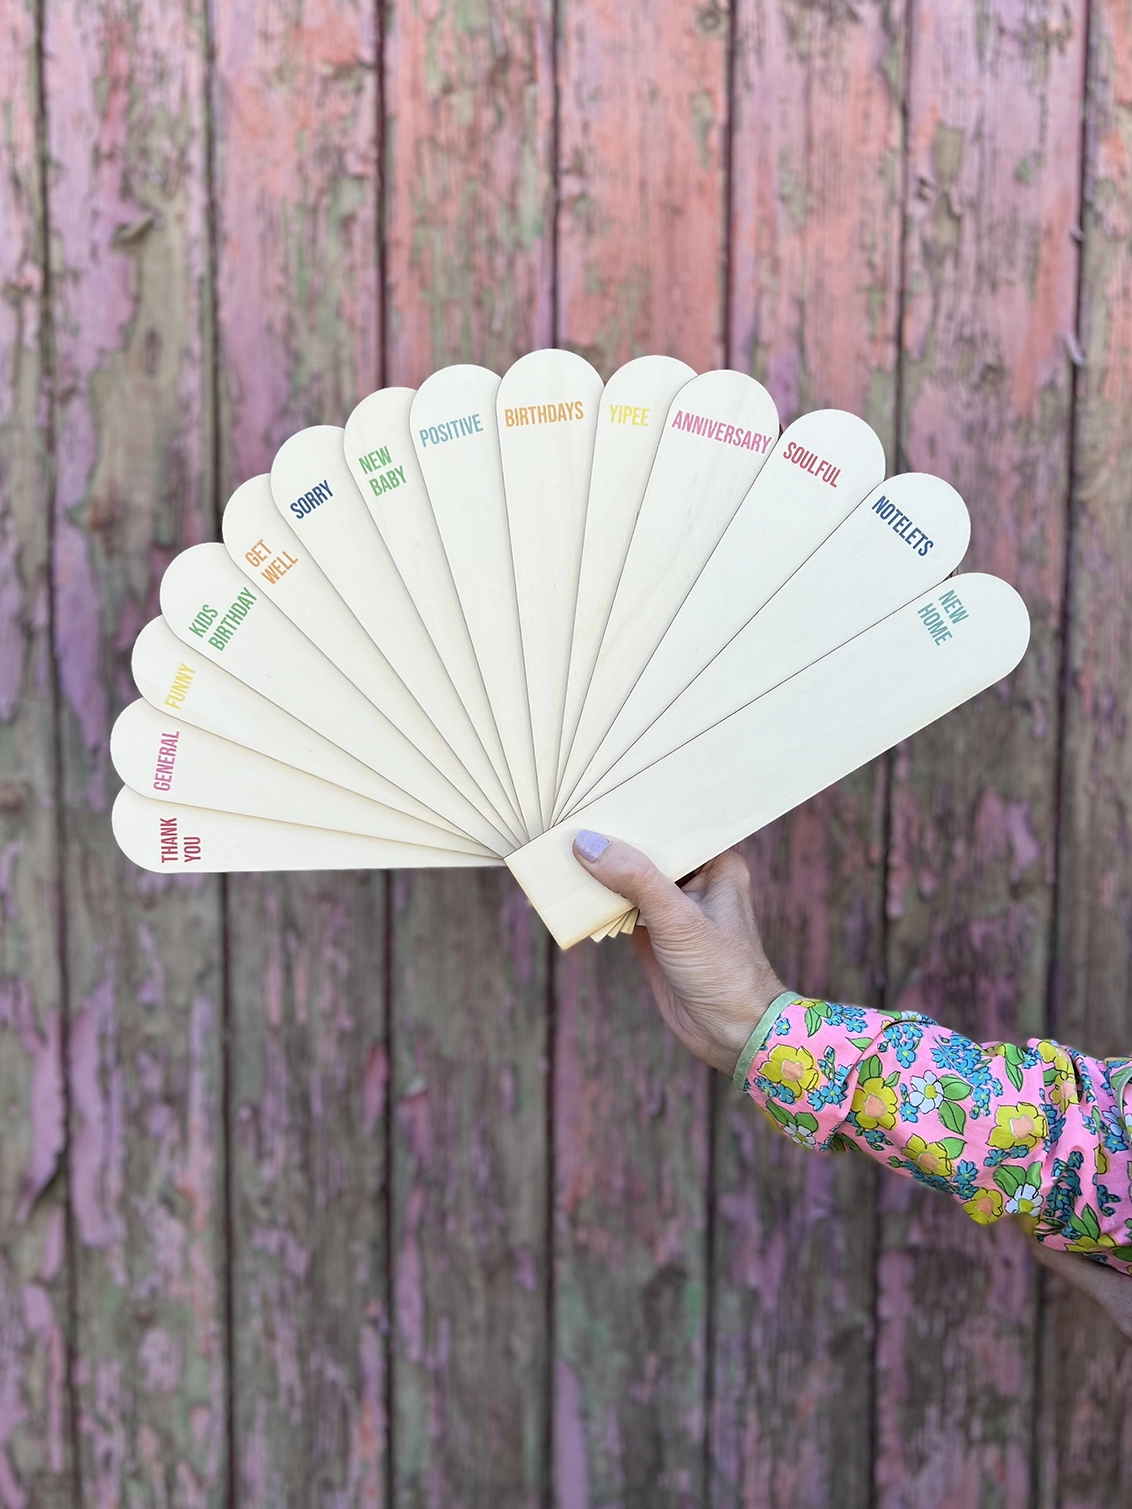 A number of wooden card dividers being held by an outstretched hand in a fan shape